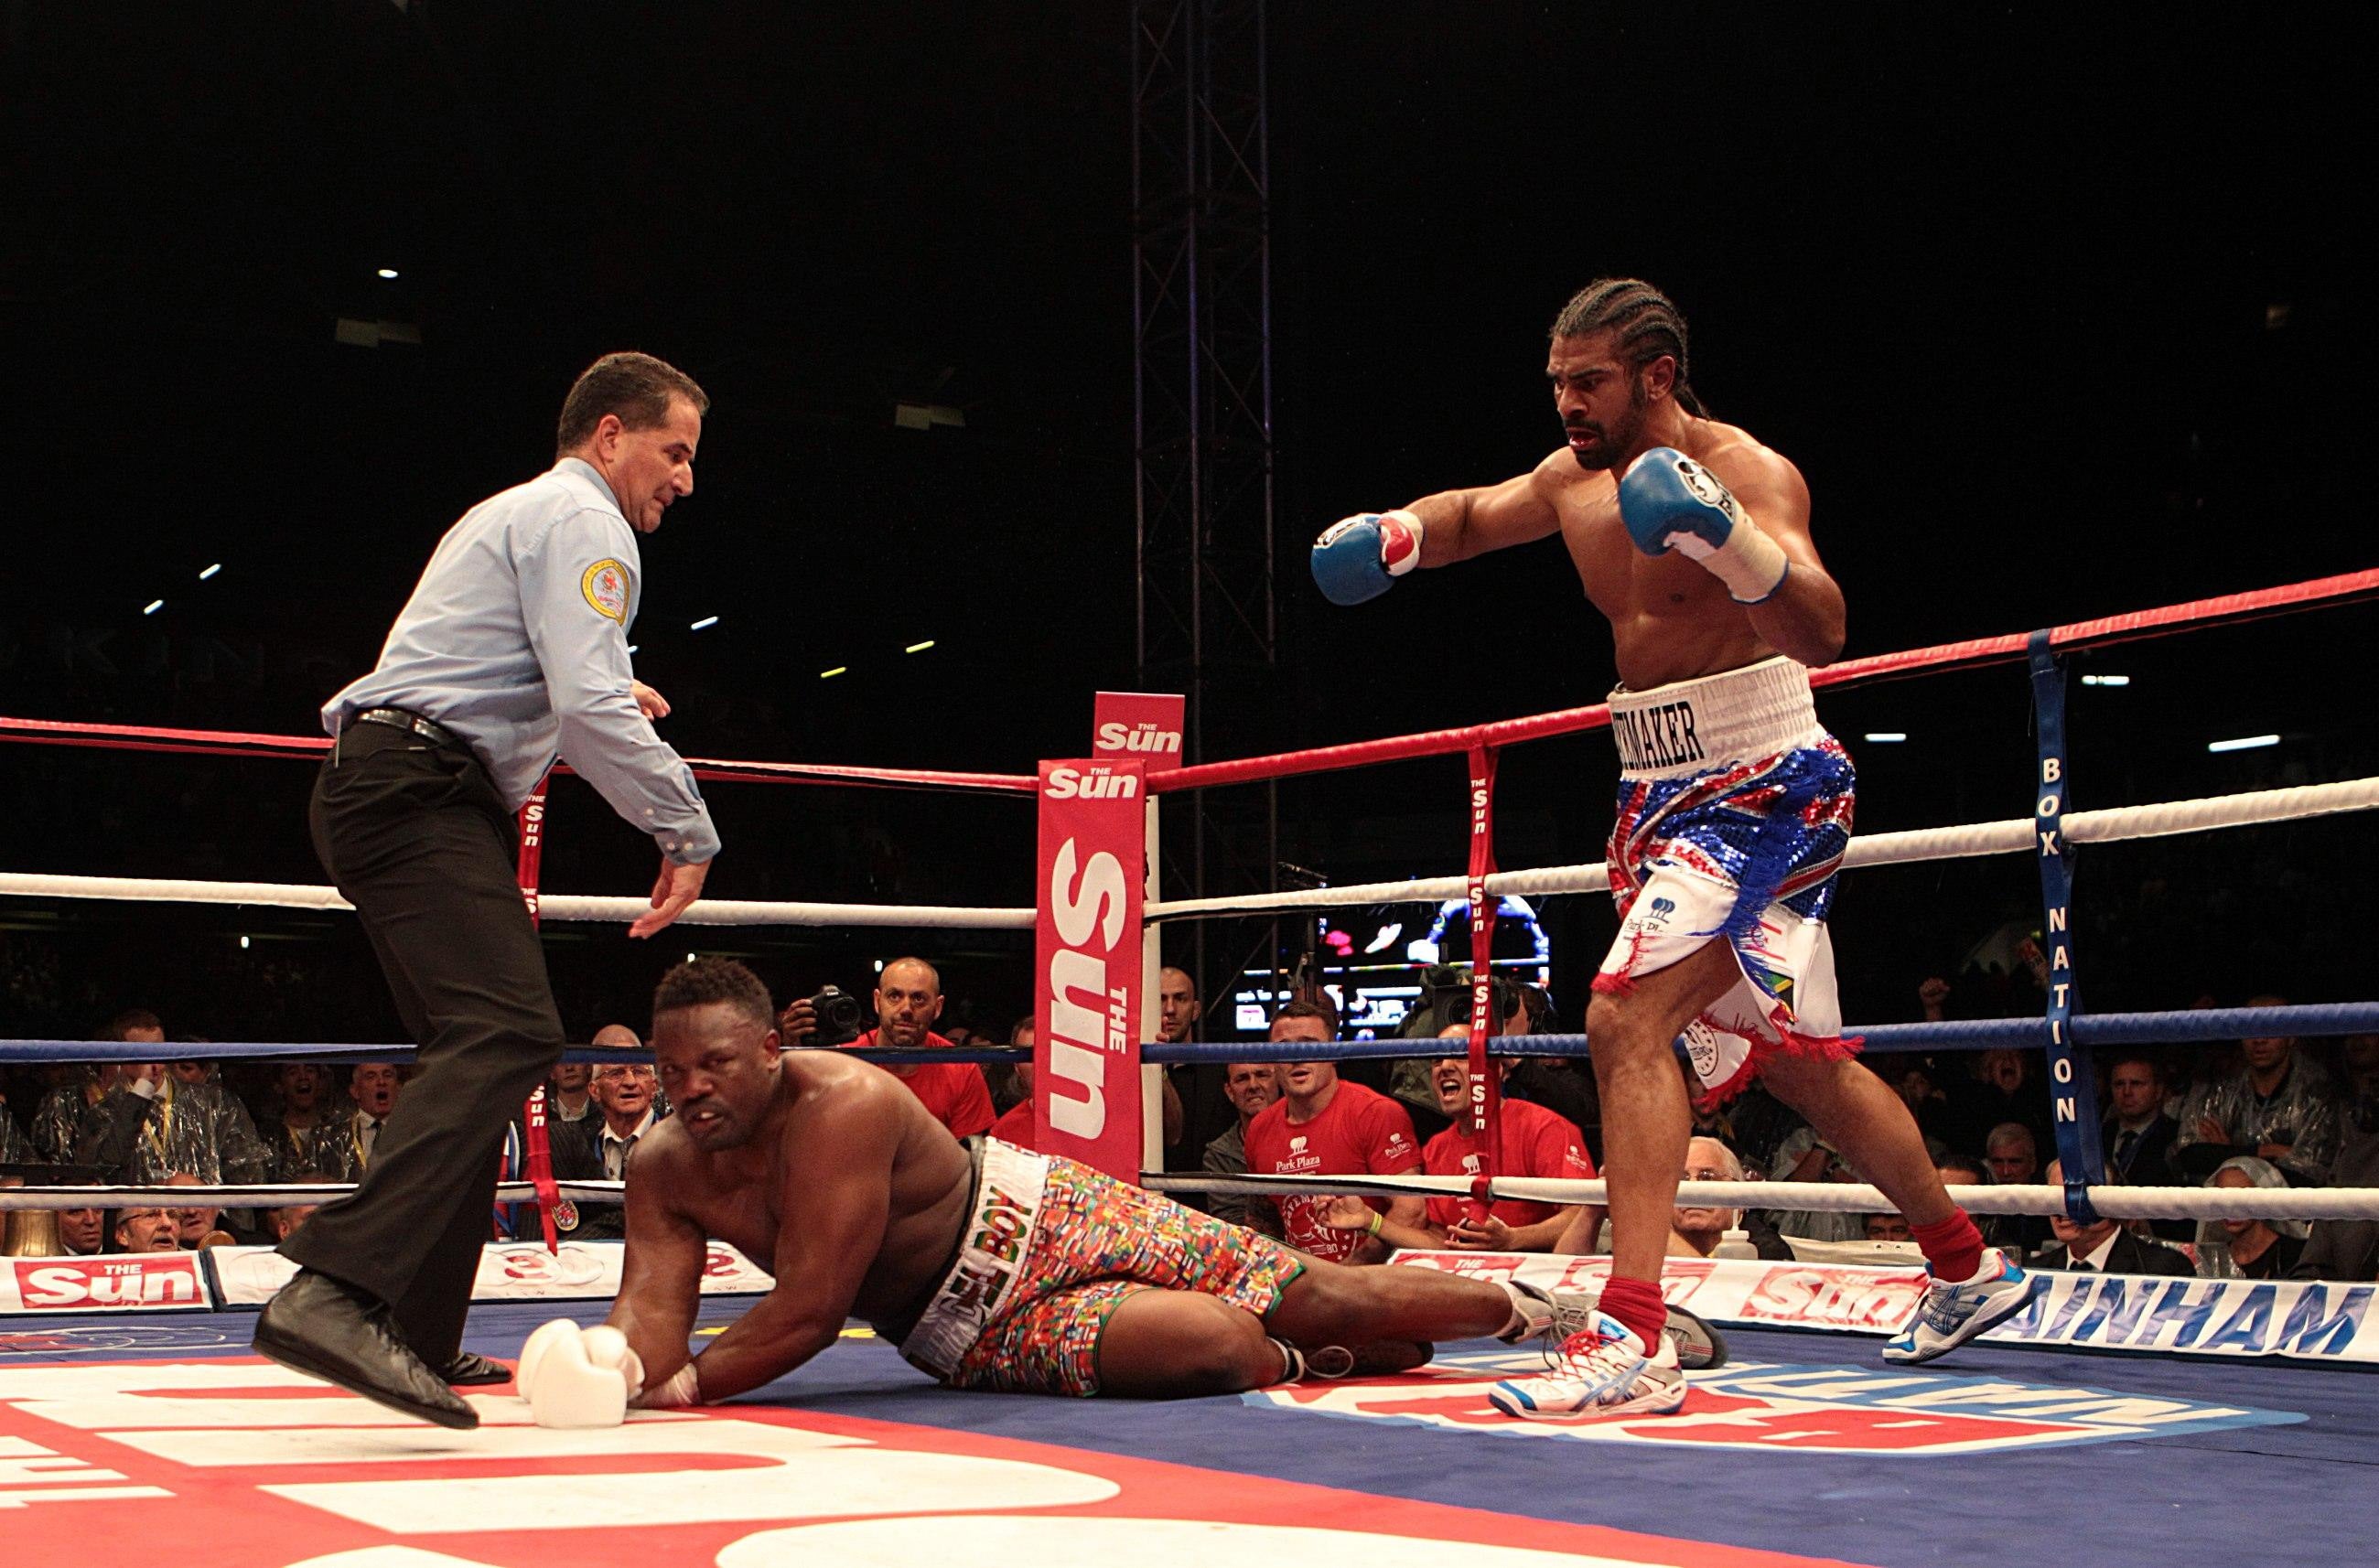 David Haye (right) knocks down Dereck Chisora in the fifth round of their heavyweight bout at Upton Park in 2012